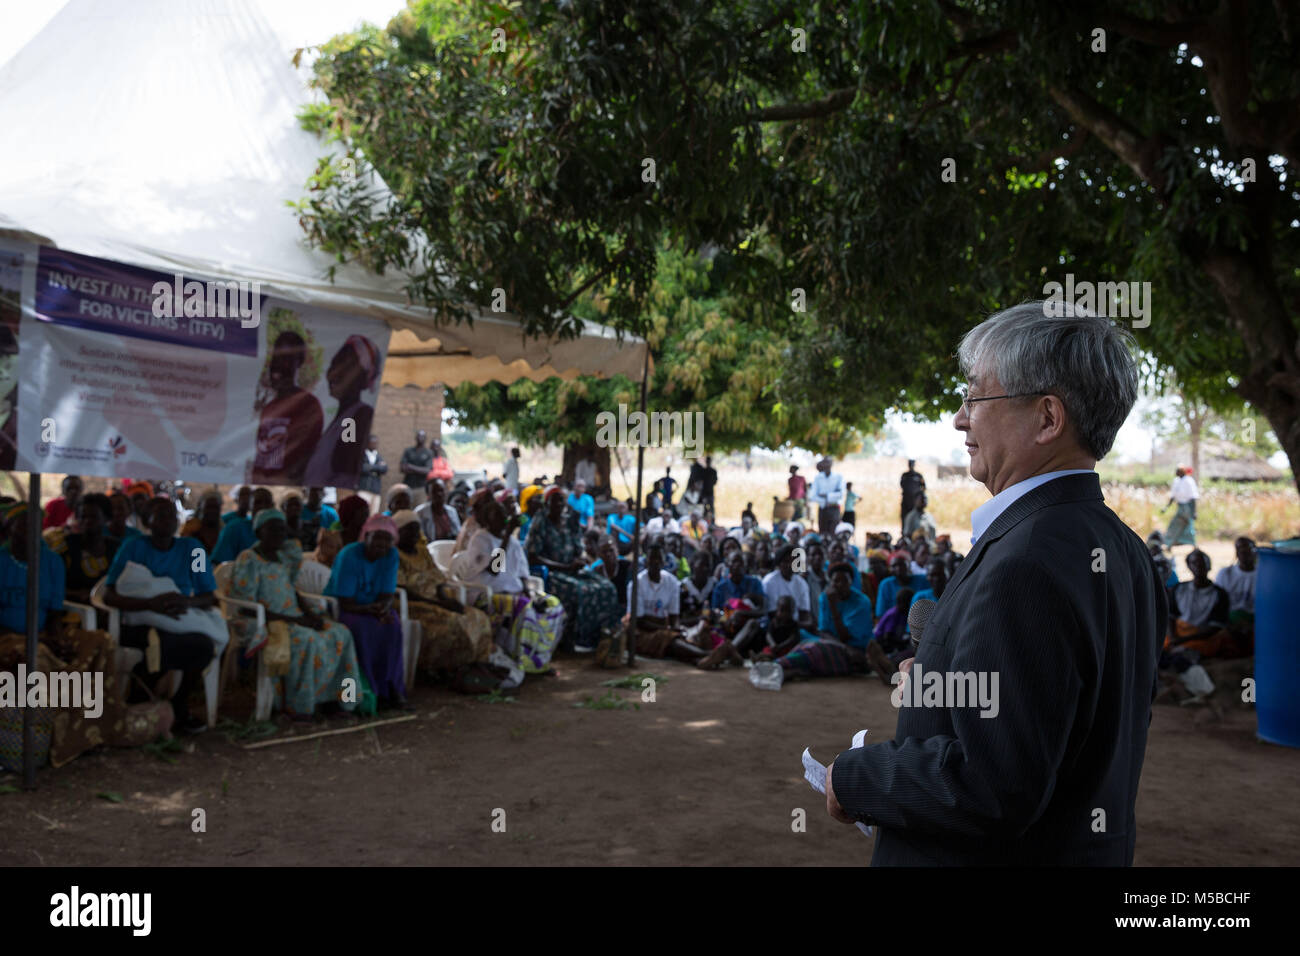 Awach, Gulu, Uganda. 22nd Feb, 2018. Judge O-Gon Kwon, president of the Assembly of State Parties to the ICC, addresses victims of LRA violence in Awach. He said it was the first time in his long career he had come face-to-face with victims of war crimes outside the courtroom, and thanked them for sharing their stories. Credit: Sally Hayden/SOPA/ZUMA Wire/Alamy Live News Stock Photo